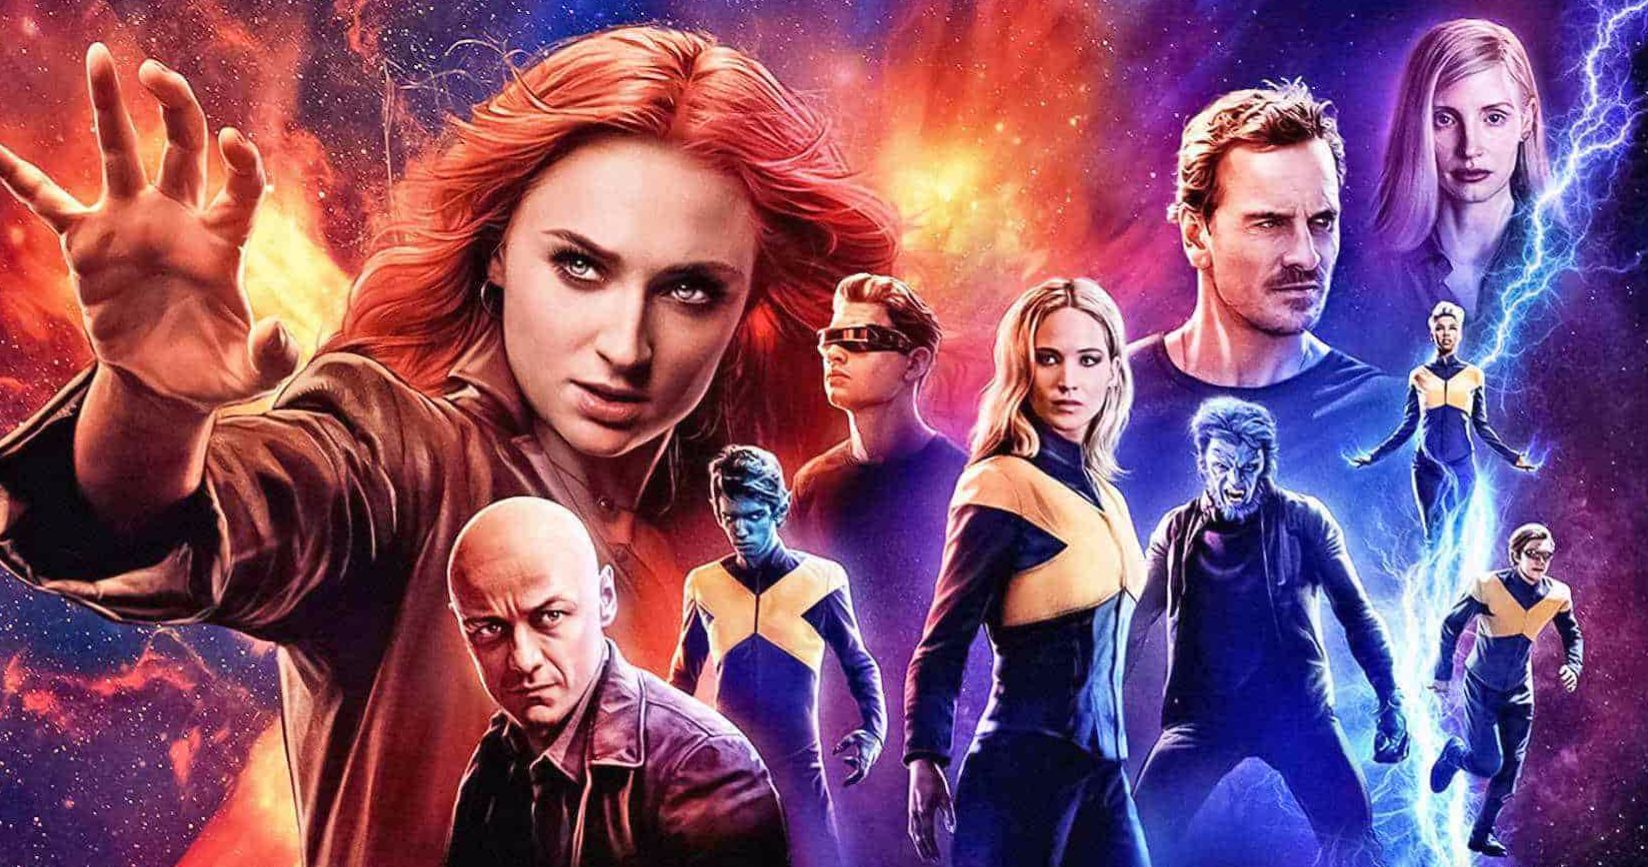 Longtime X-Men Producer Throws Serious Shade at Dark Phoenix in Now-Deleted Tweet